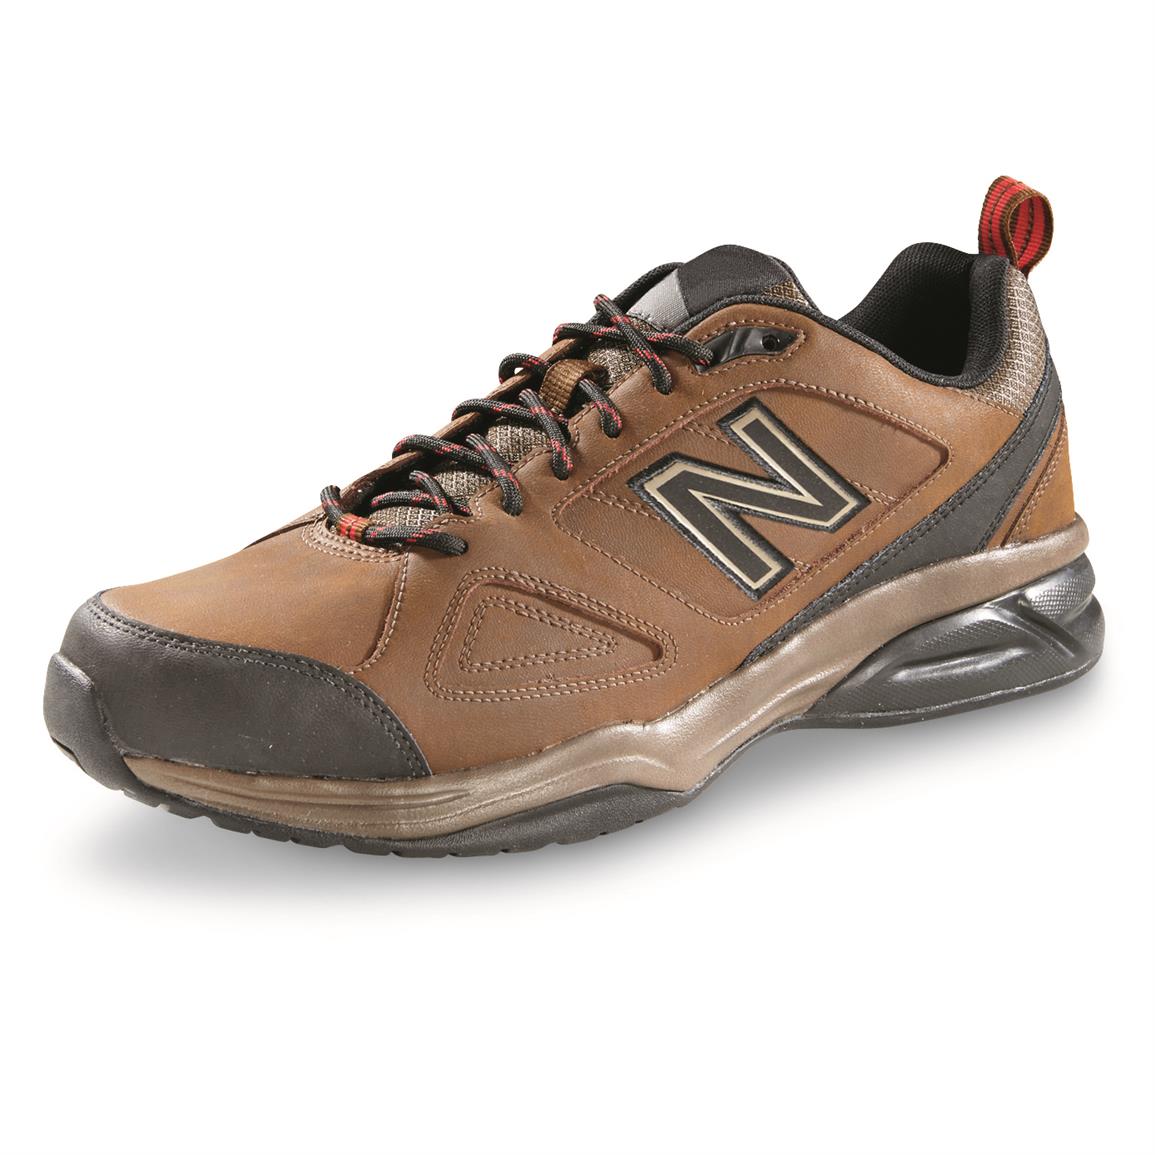 New Balance Men's 623 v3 Leather Water 